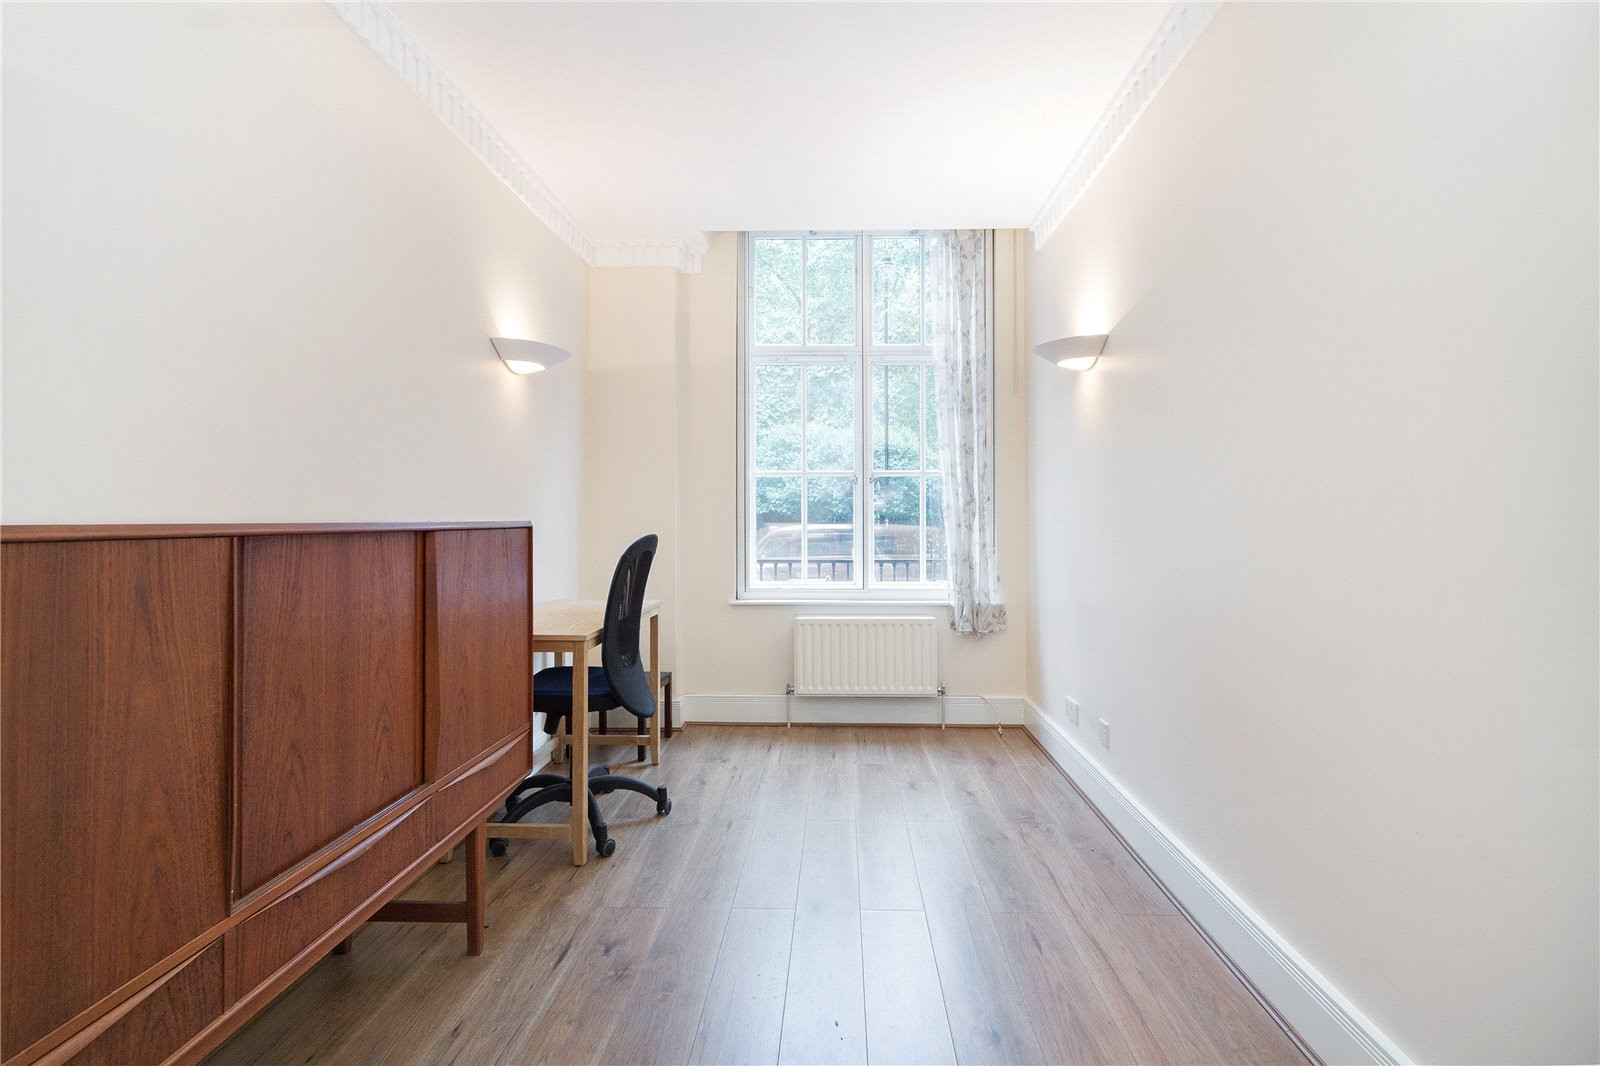 Hardwood Flooring Company West Hampstead Of 1 Bedroom Property for Sale In Bloomsbury Mansions 13 16 Russell within Description